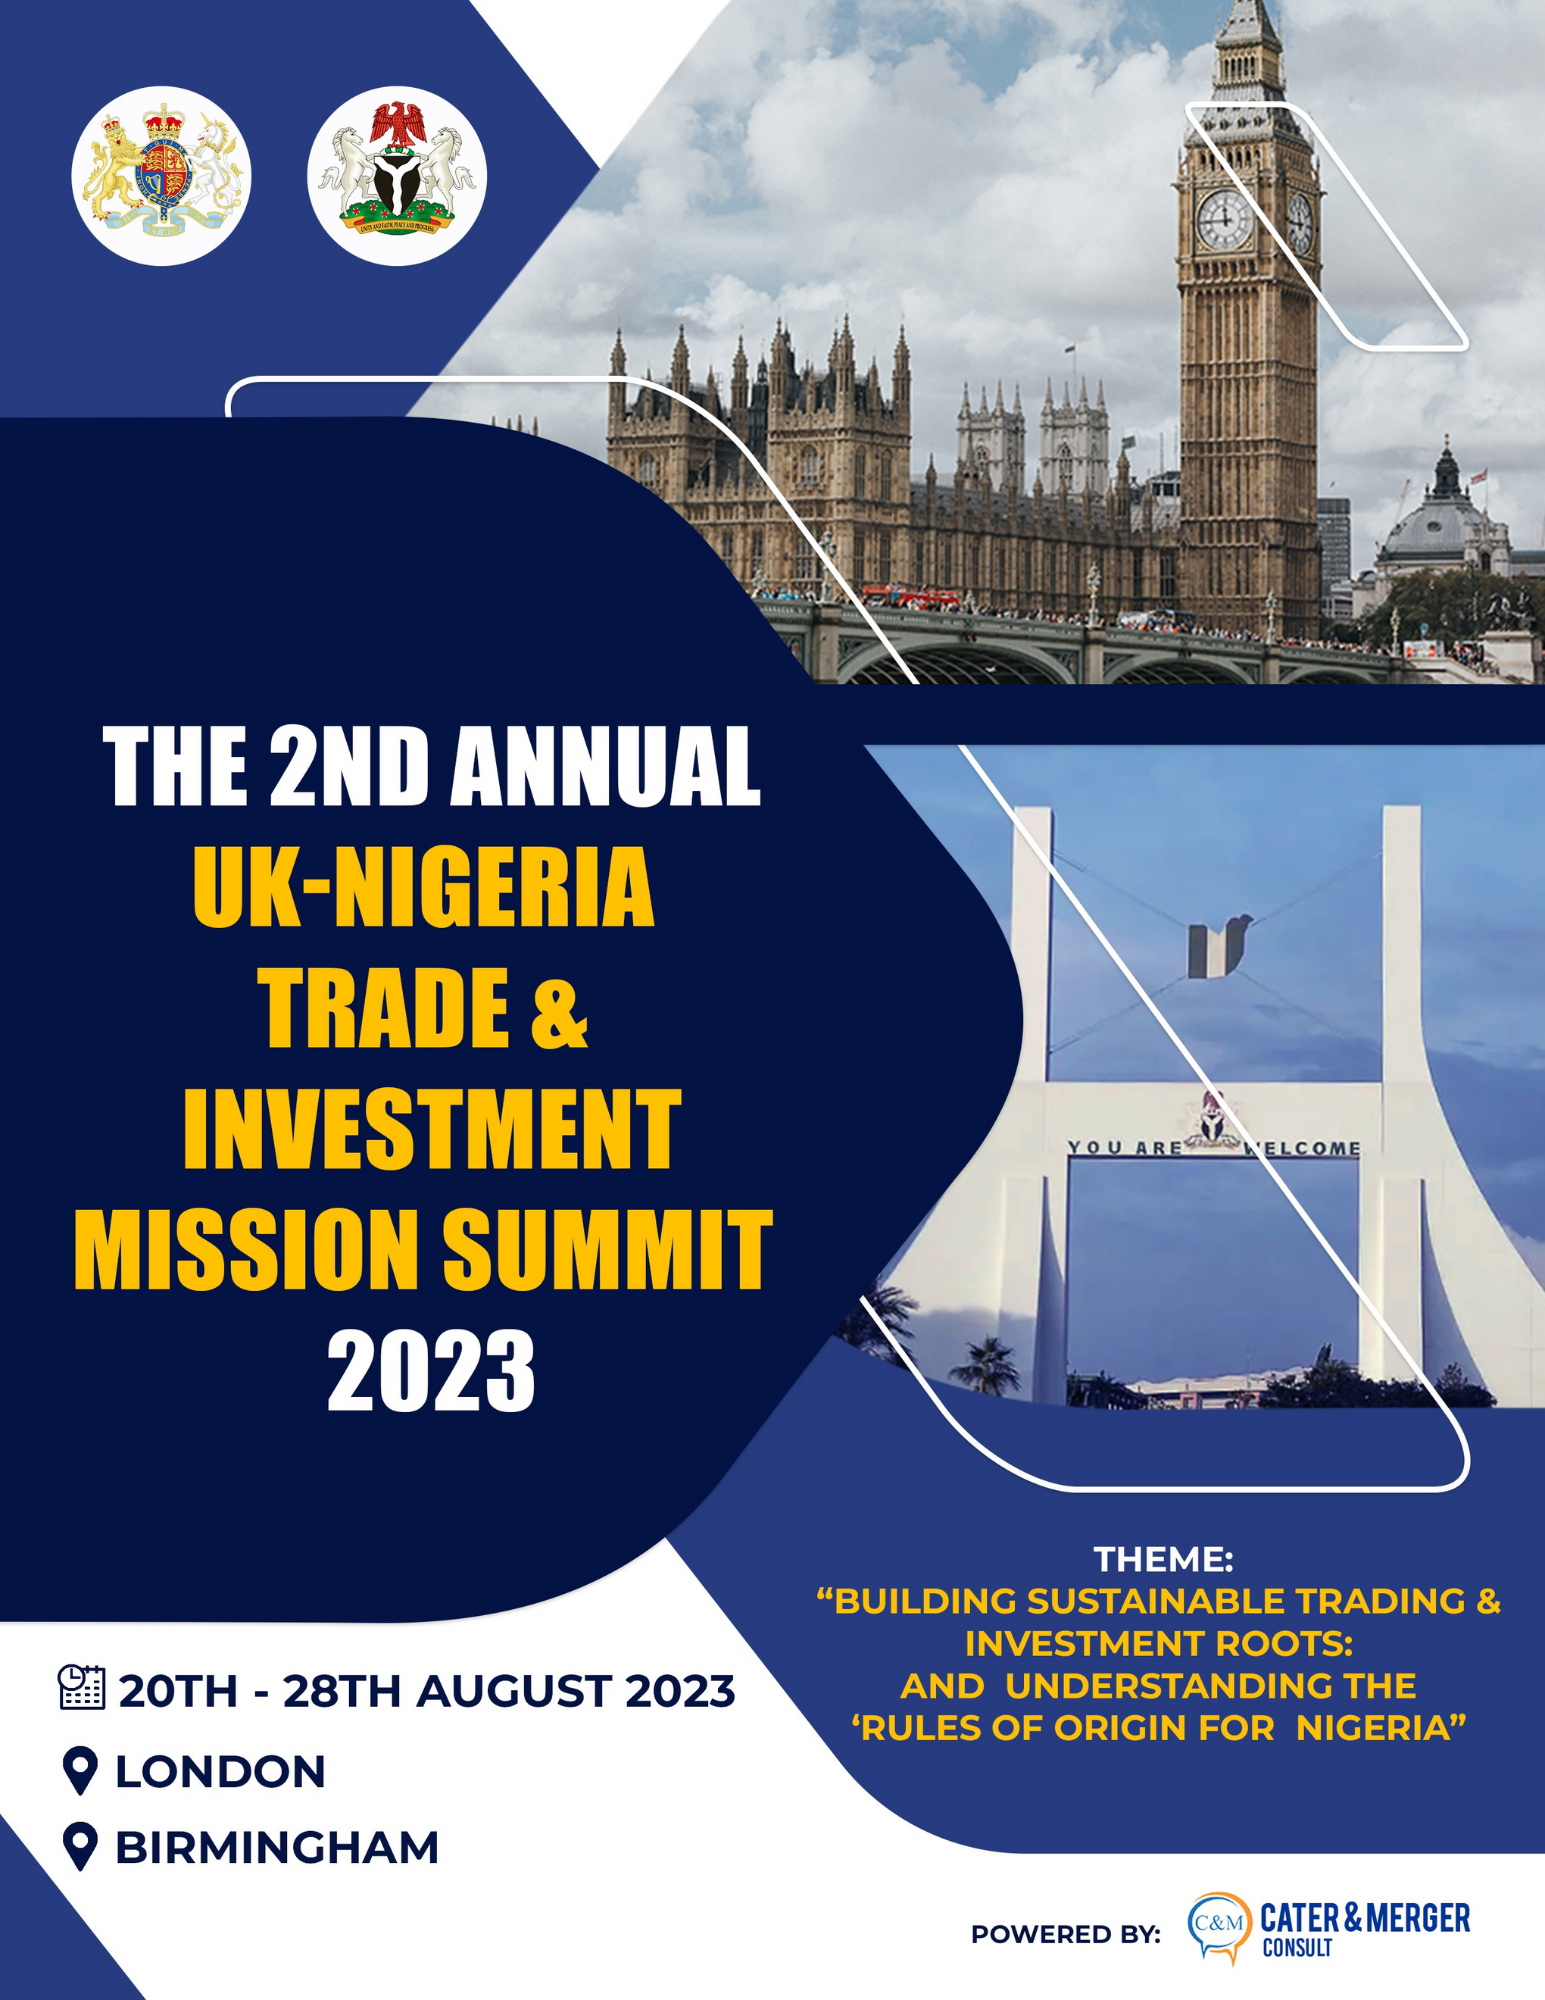 THE 2ND ANNUAL UK-NIGERIA TRADE & INVESTMENT MISSION SUMMIT 2023